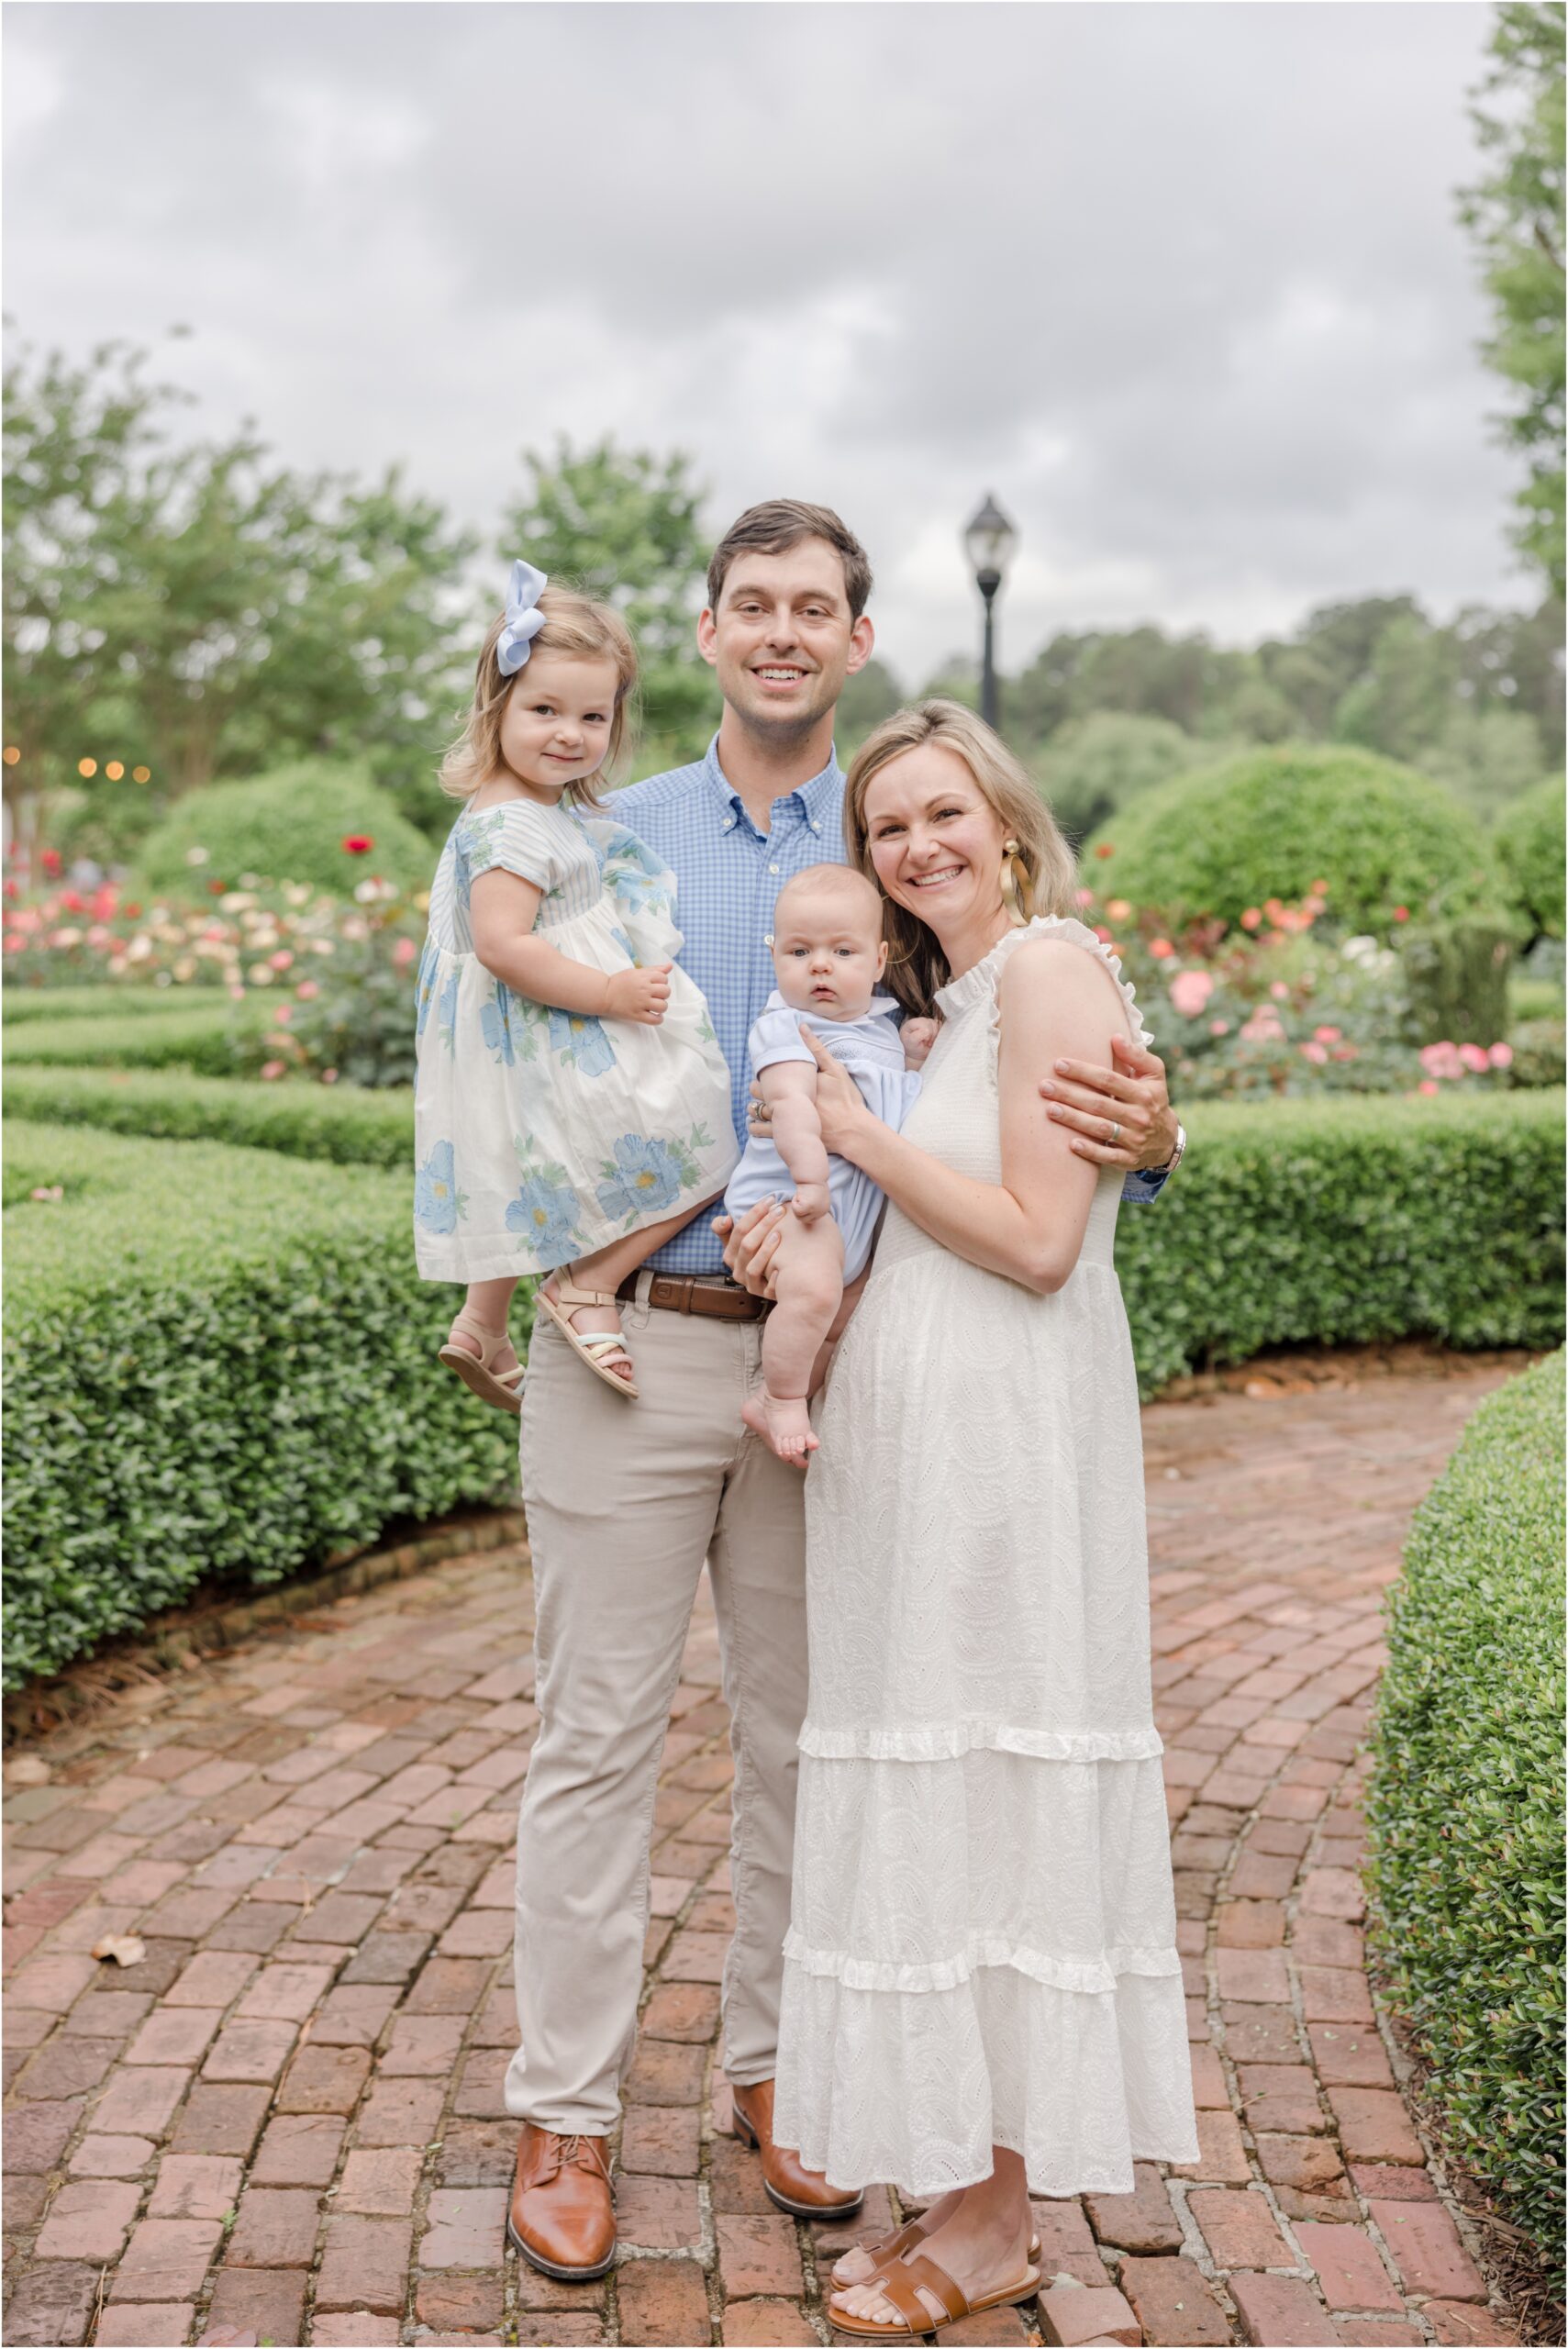 Greenville family photography session in the Furman rose garden.